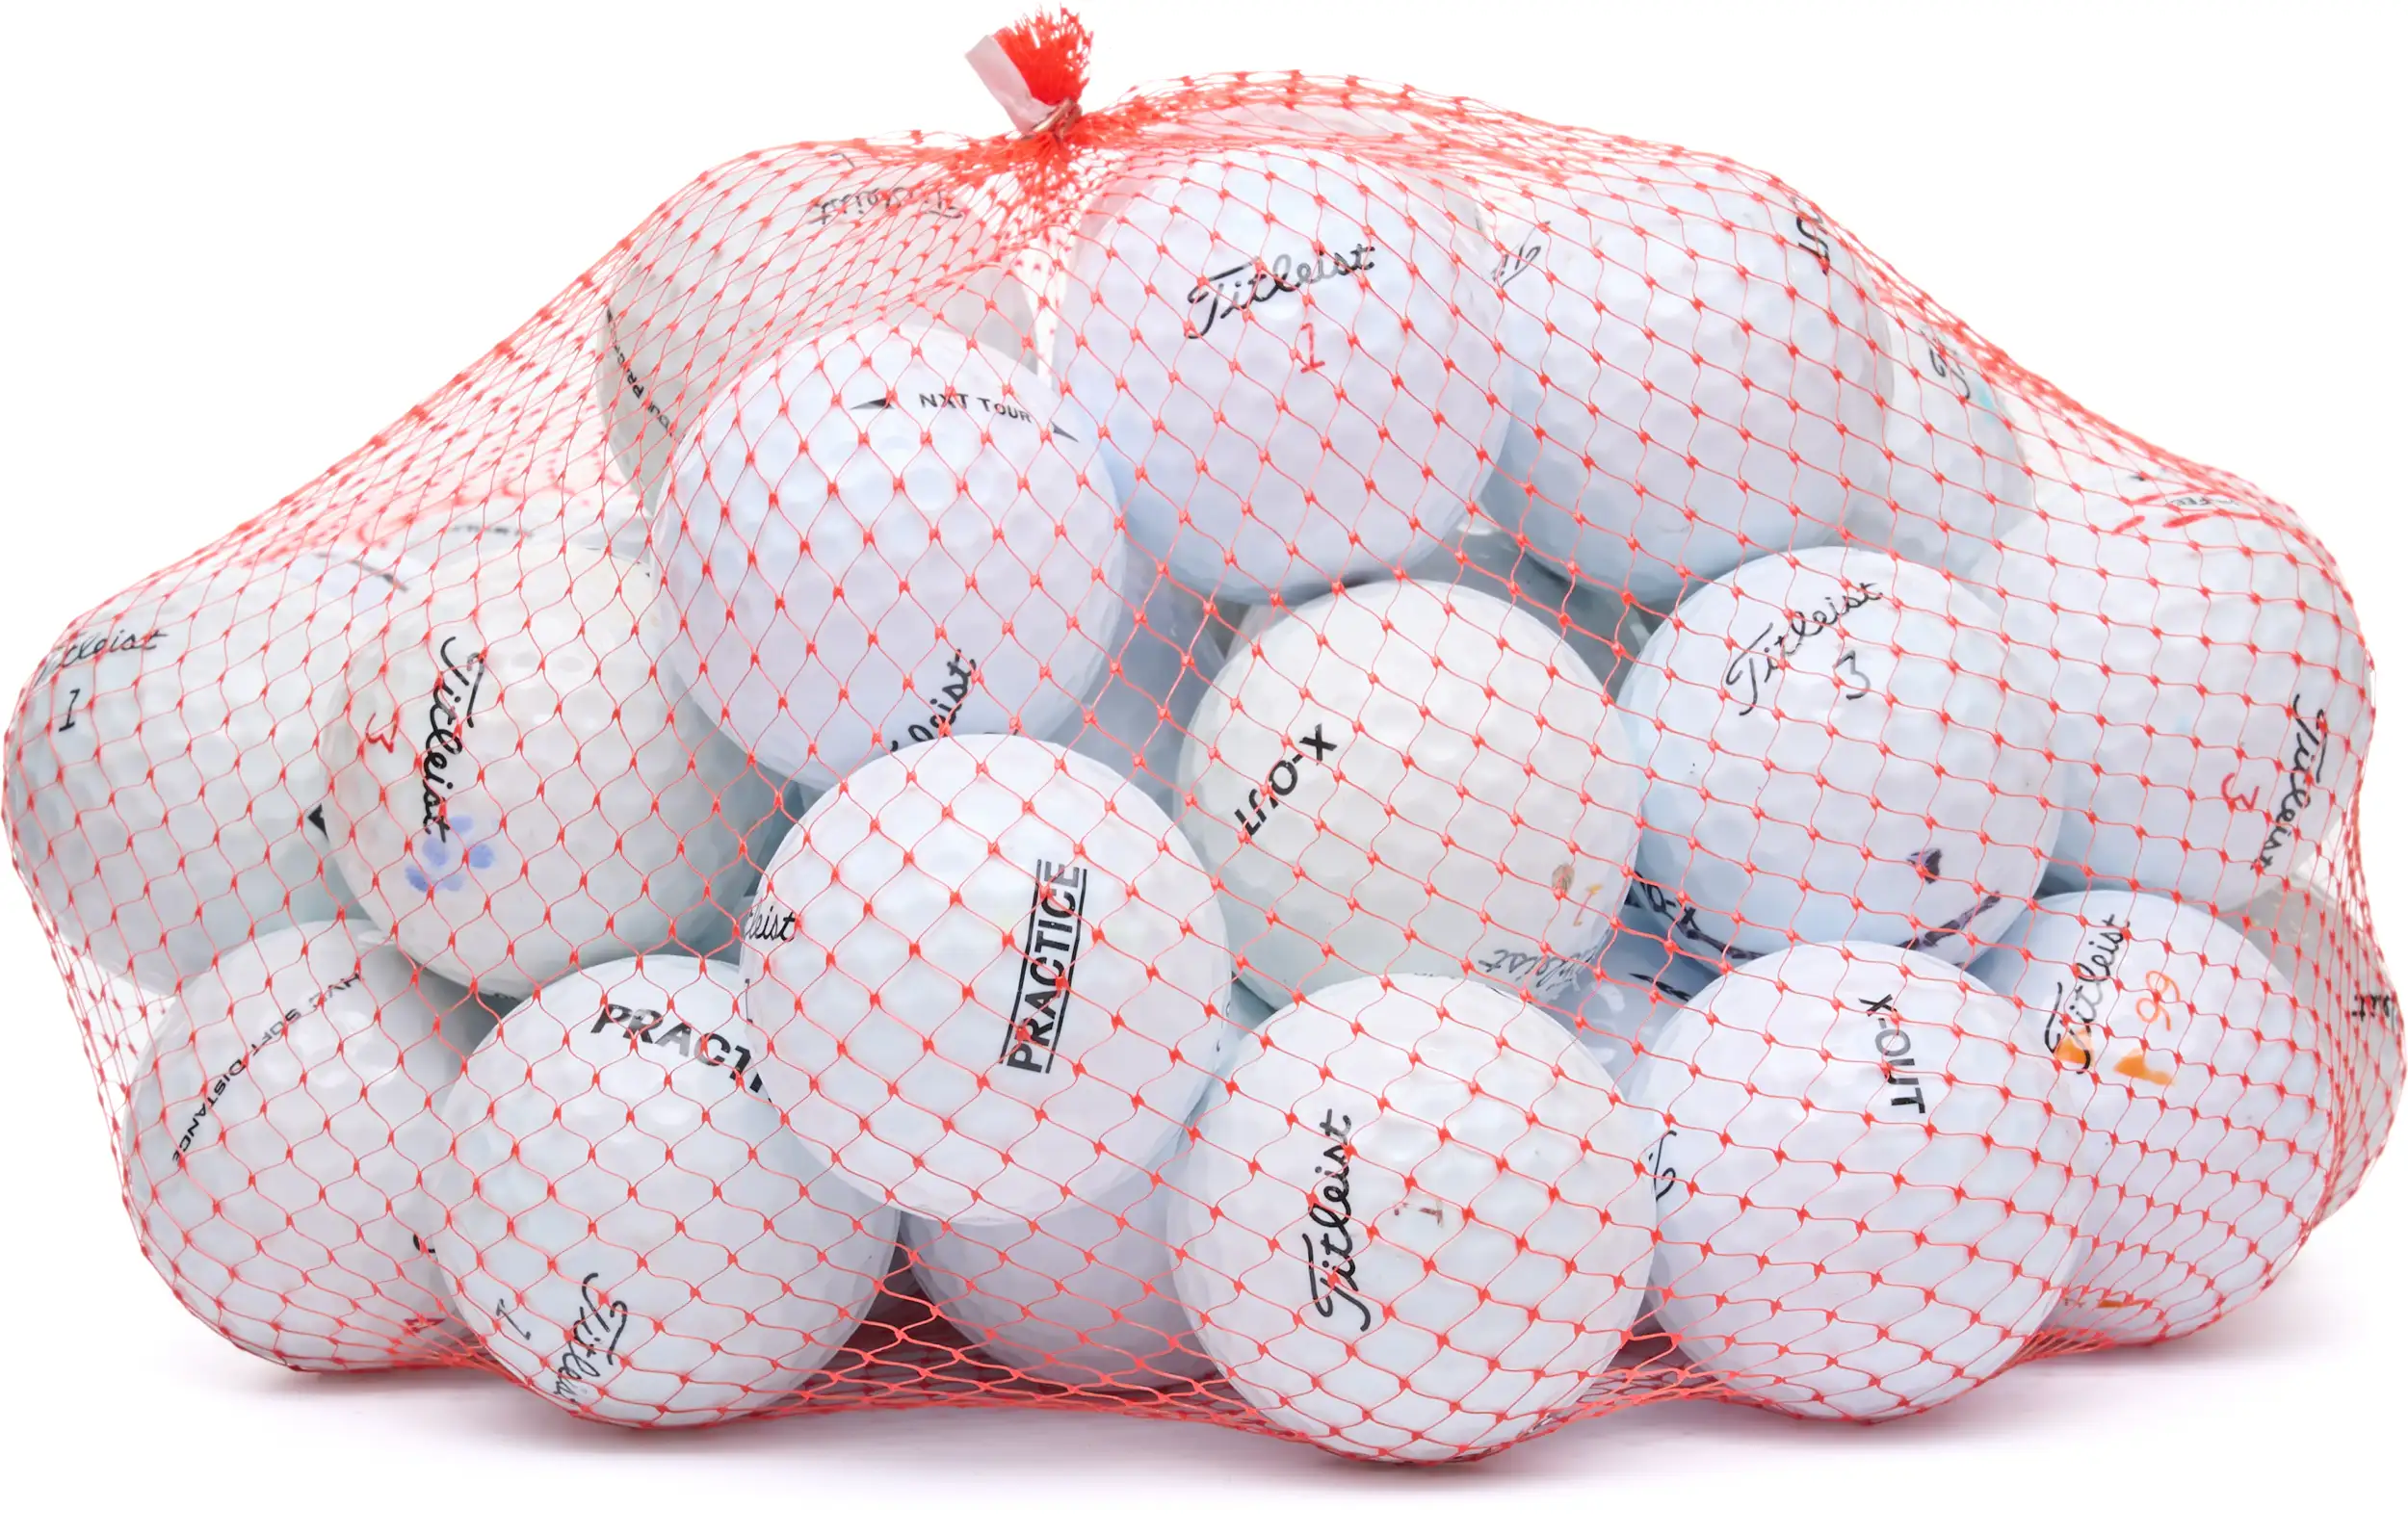 50 Titleist X-OUT/Practice Lakeballs